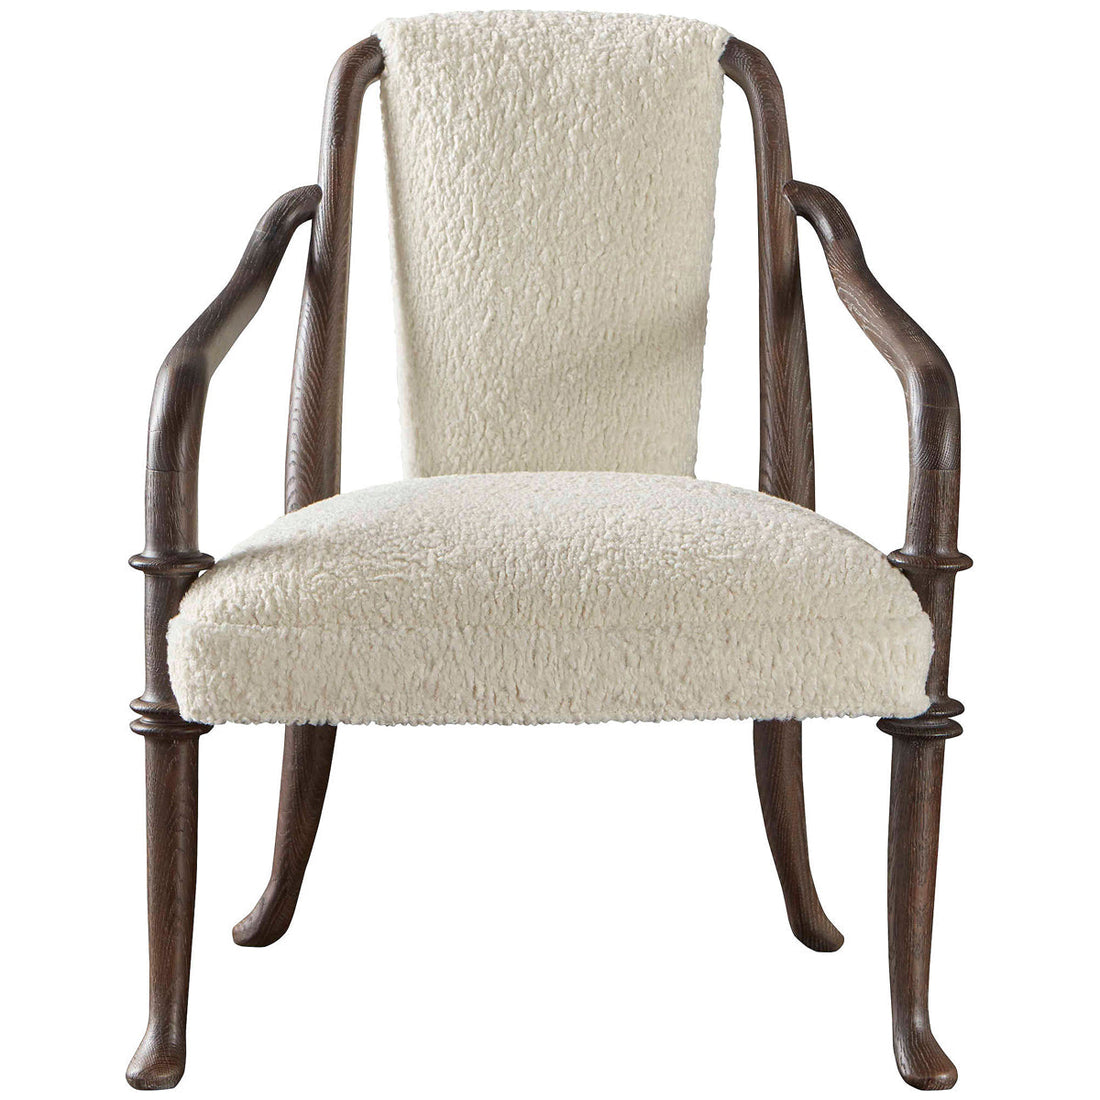 Baker Furniture Florence Occasional Chair MR8538C